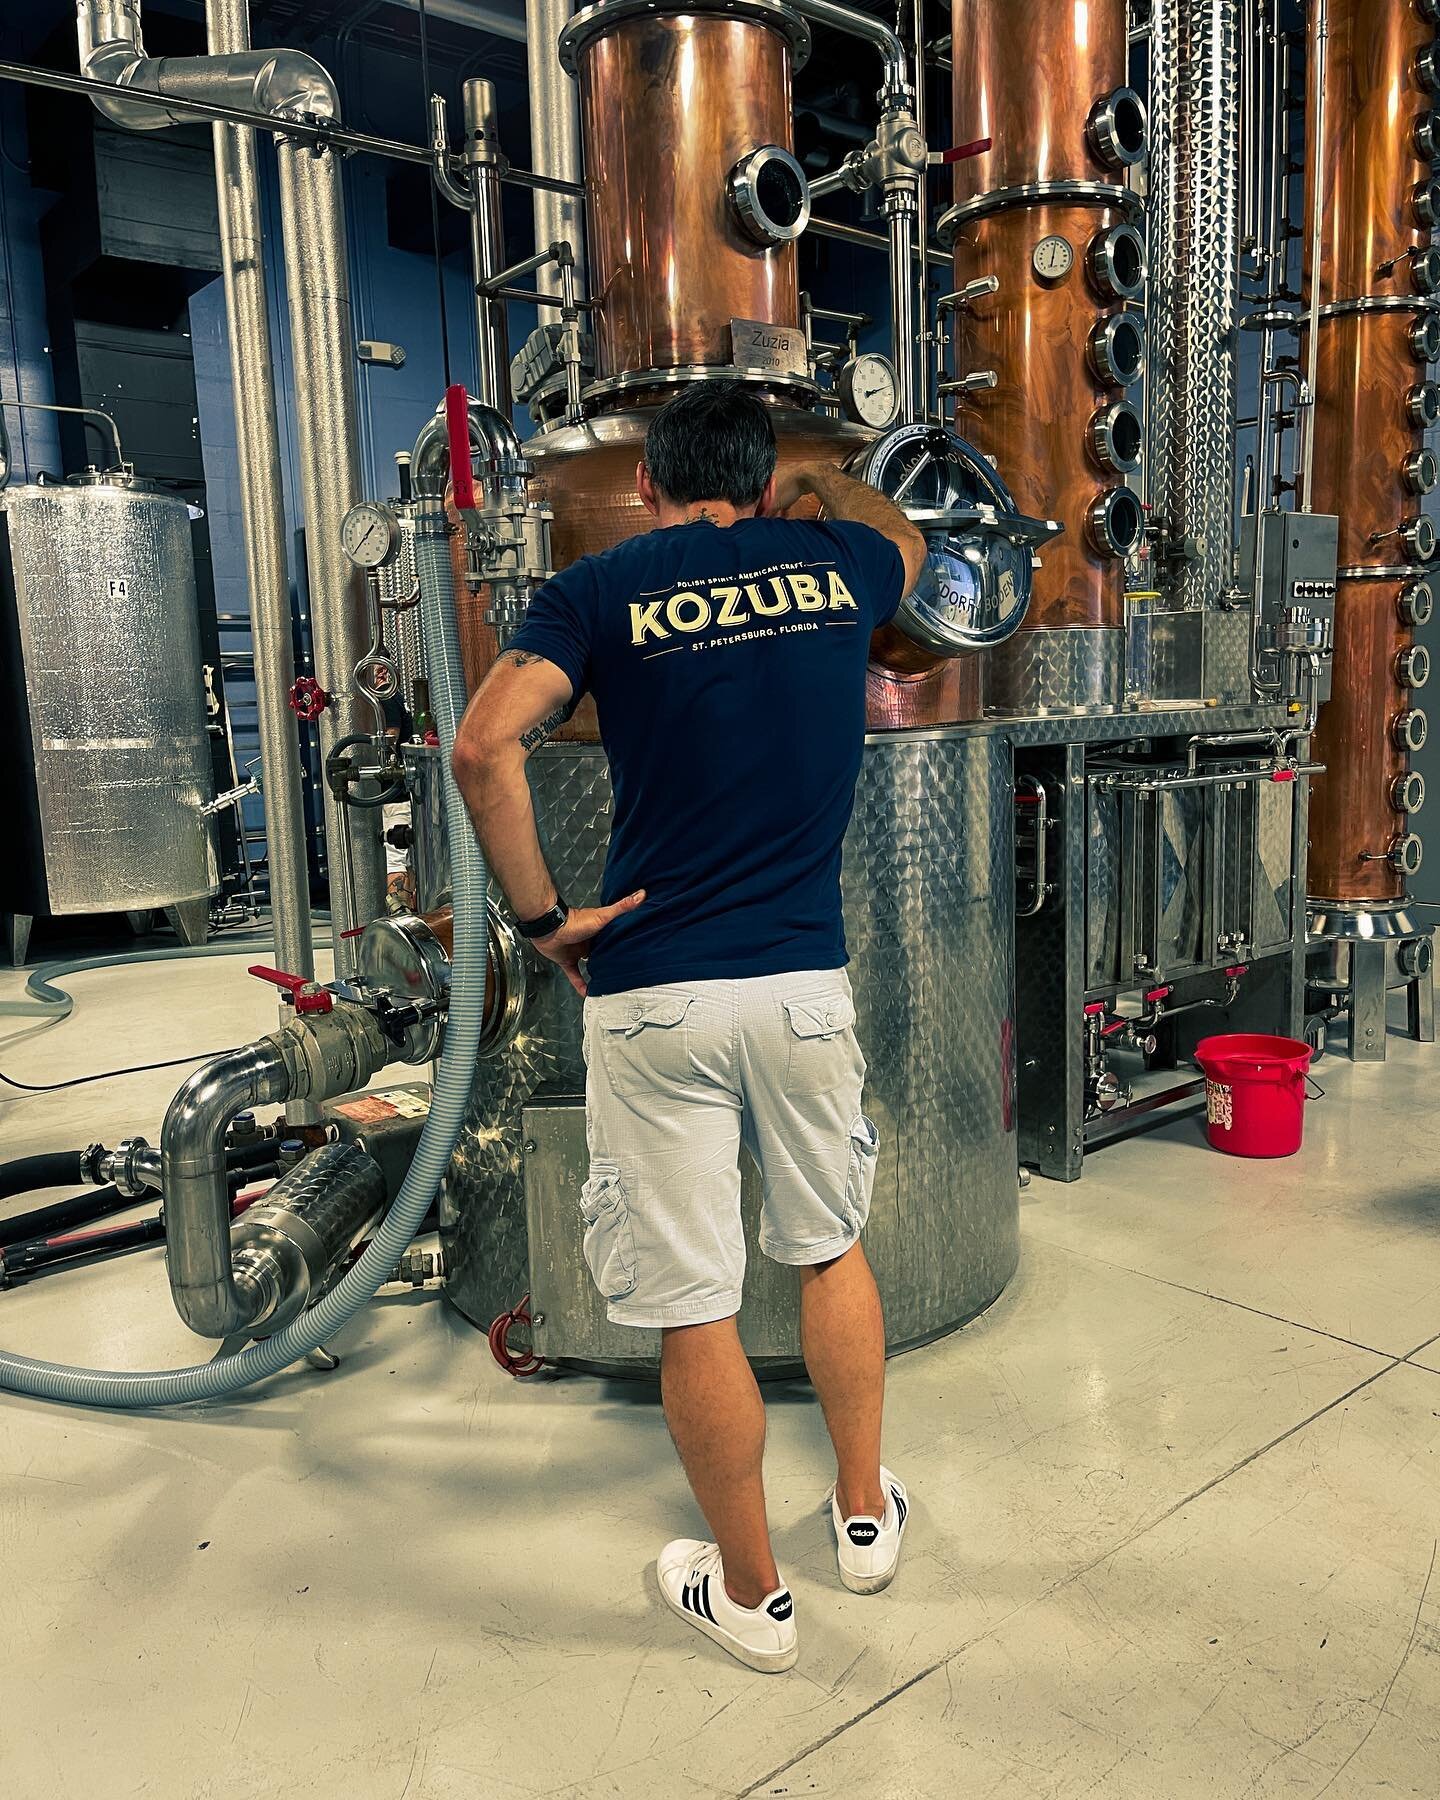 Passion. Dedication. Patience. Consistency. Honesty. Transparency. This is what distilling is about at Kozuba &amp; Sons Distillery.